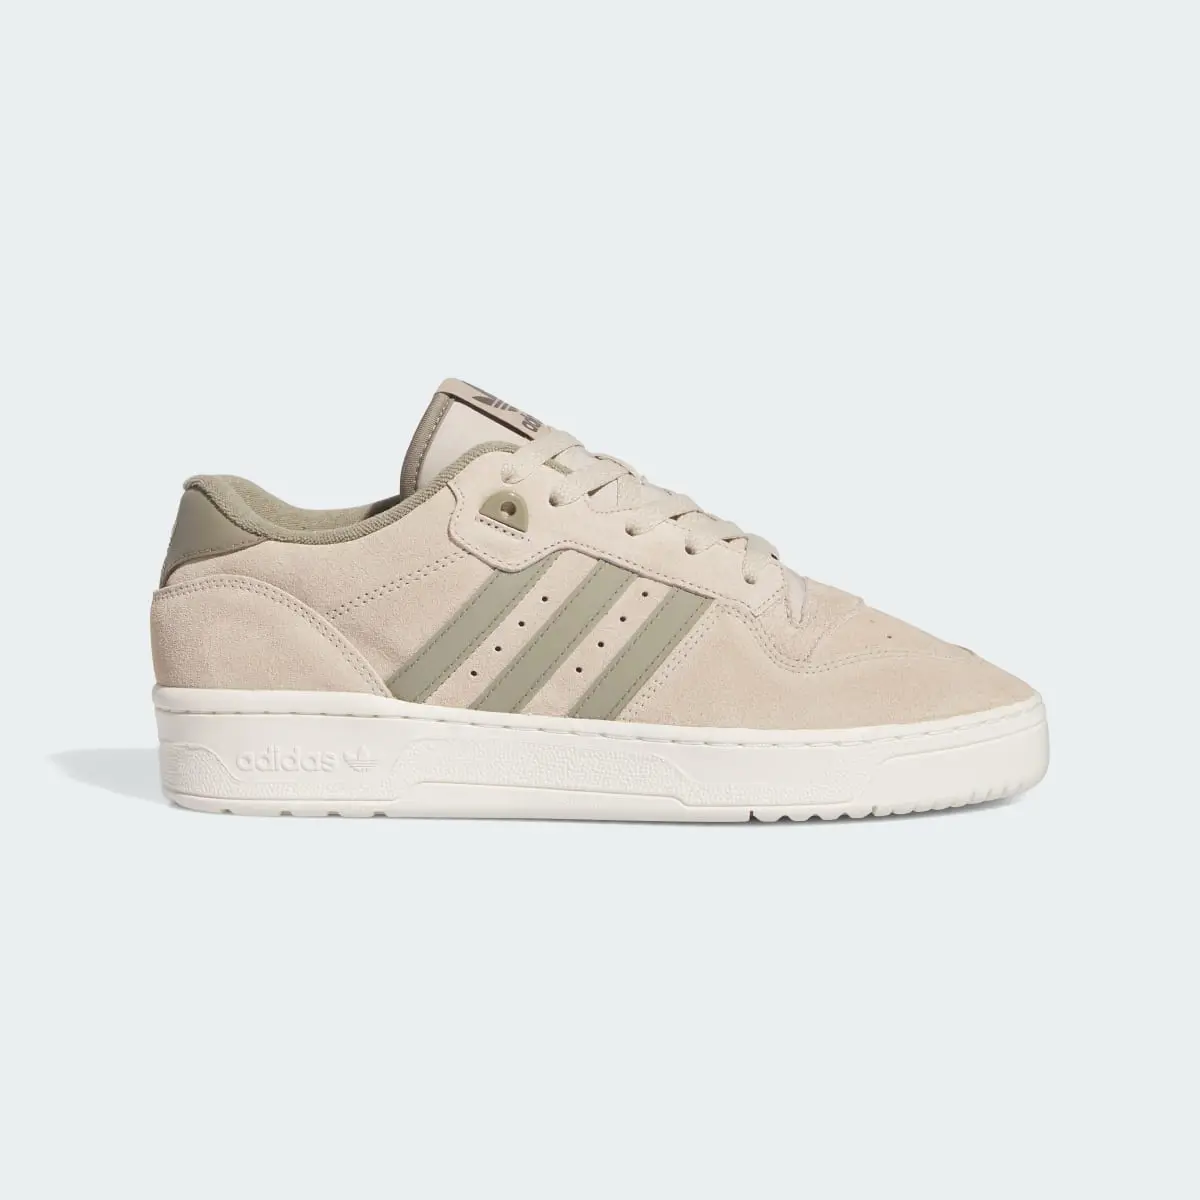 Adidas Chaussure Rivalry Low. 2